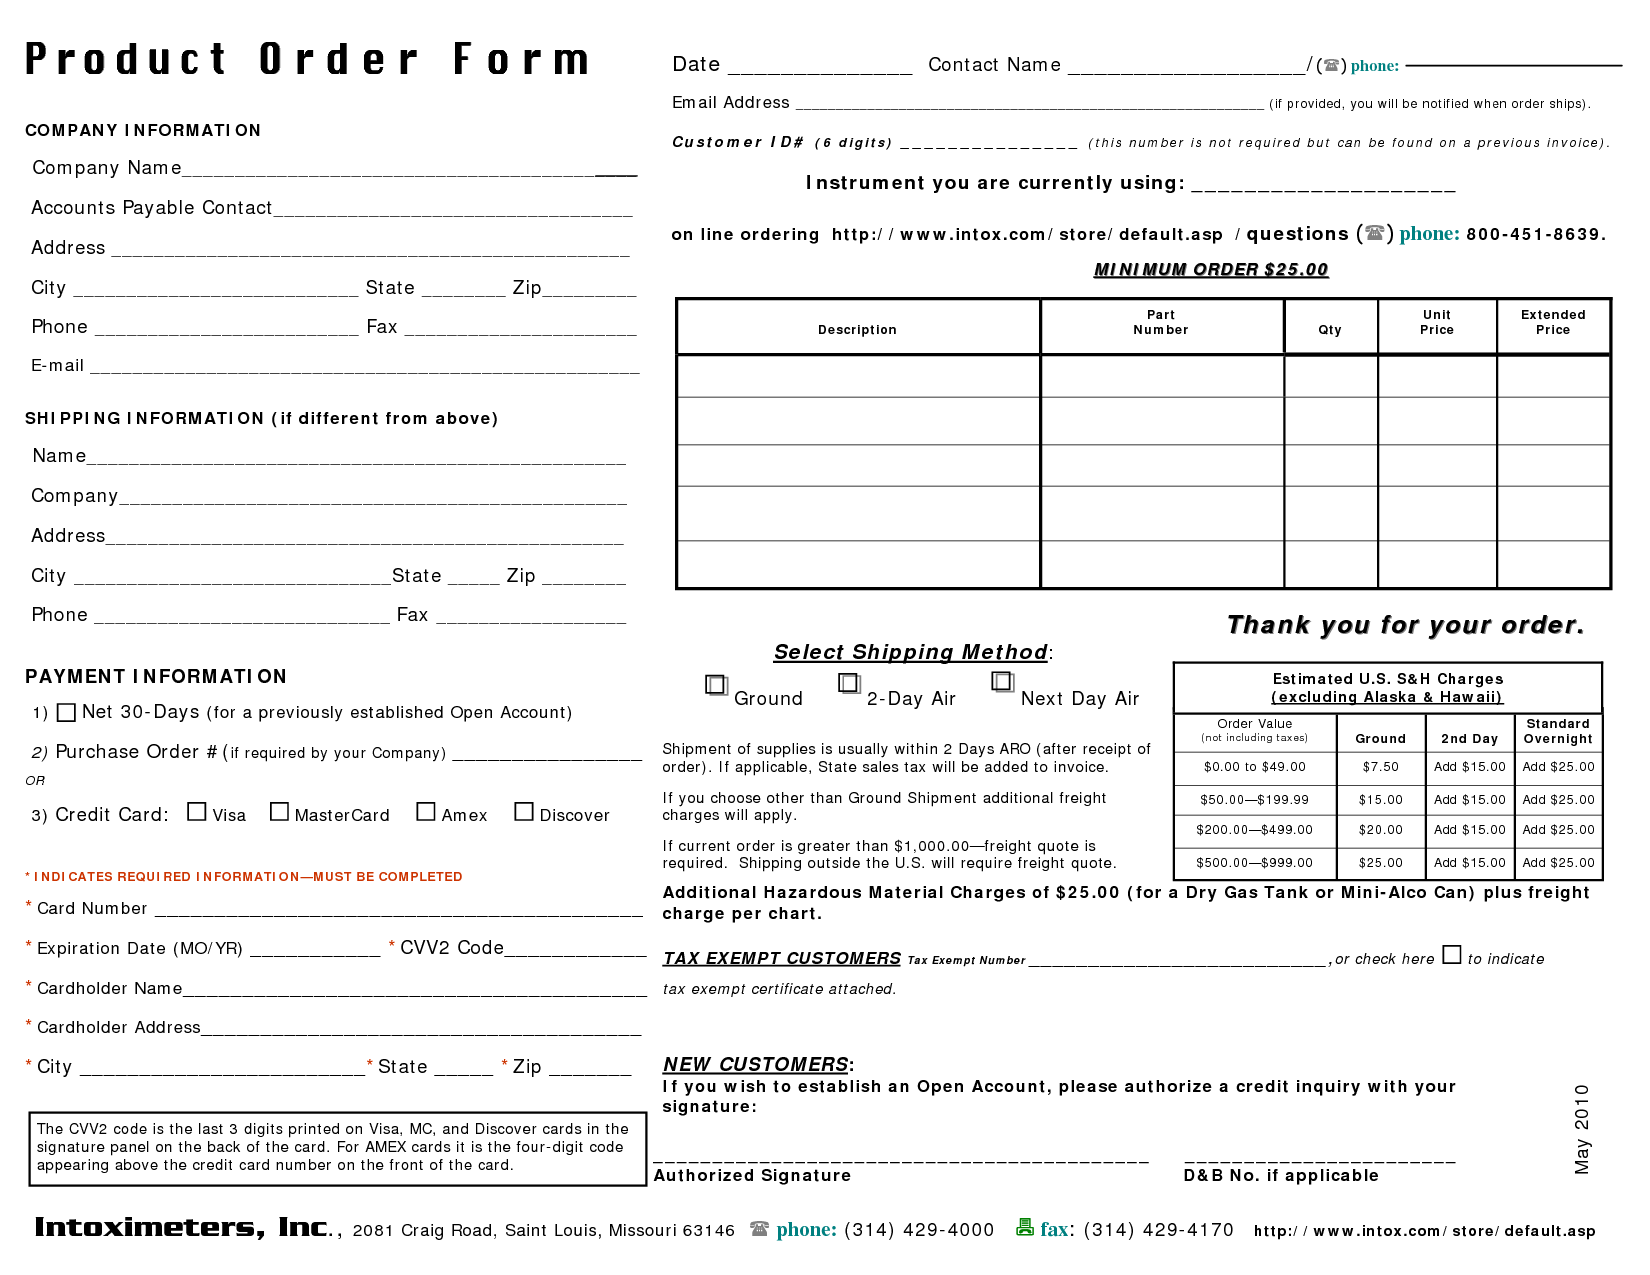 28 Images of Product Order Form Template | leseriail.com